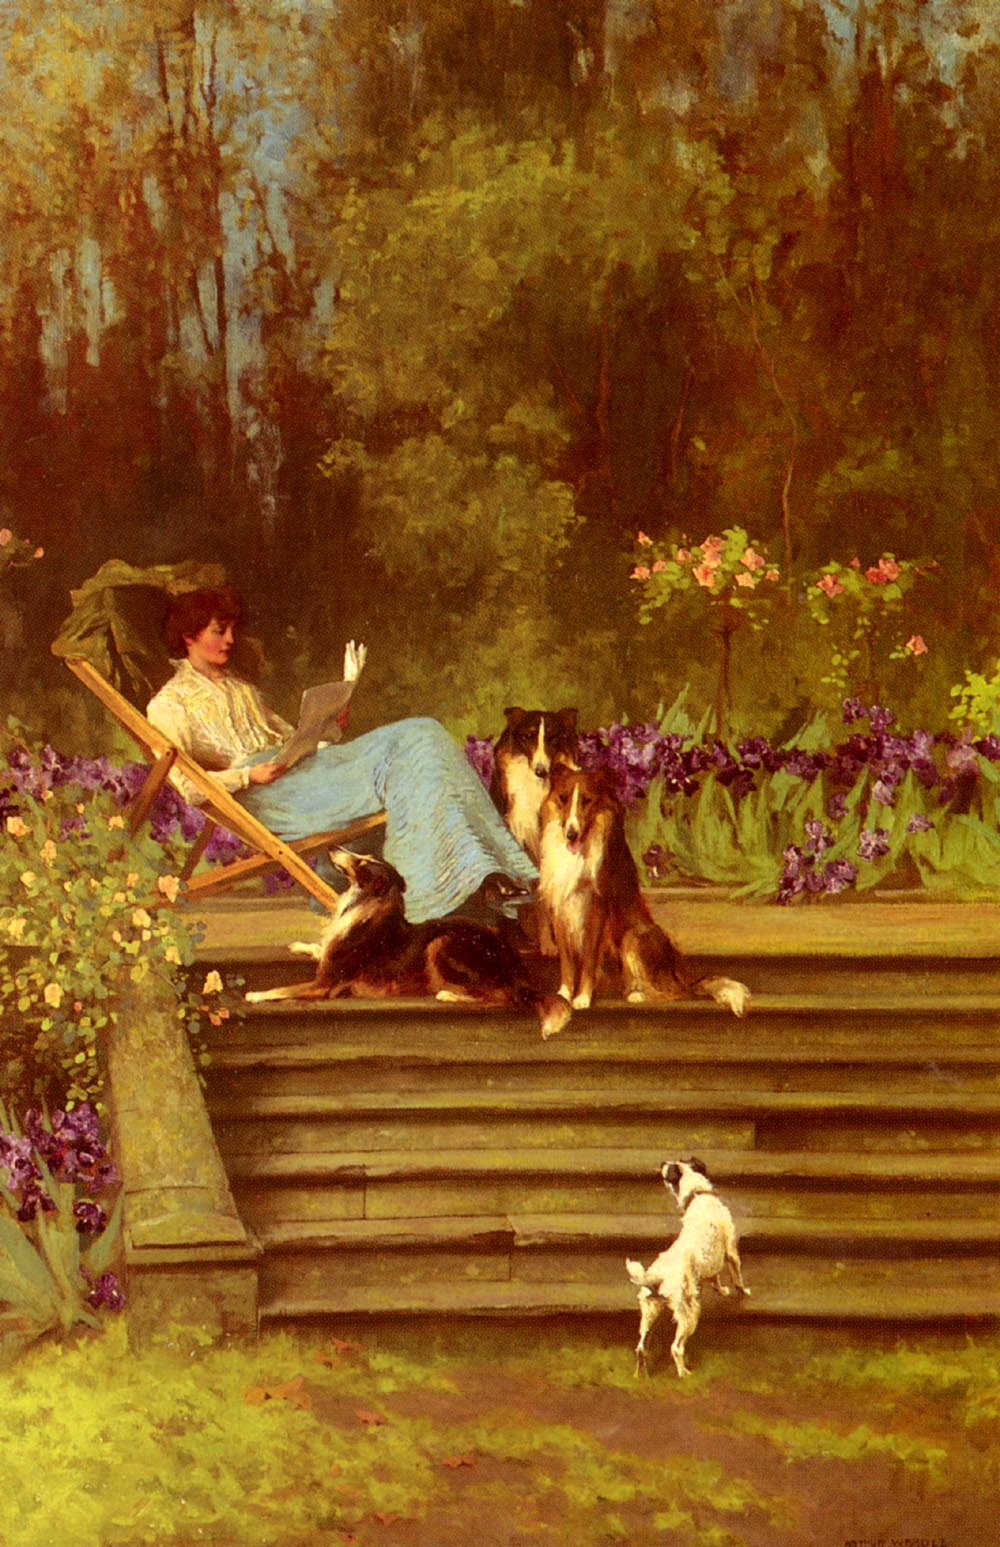 Among Friends by Arthur Wardle